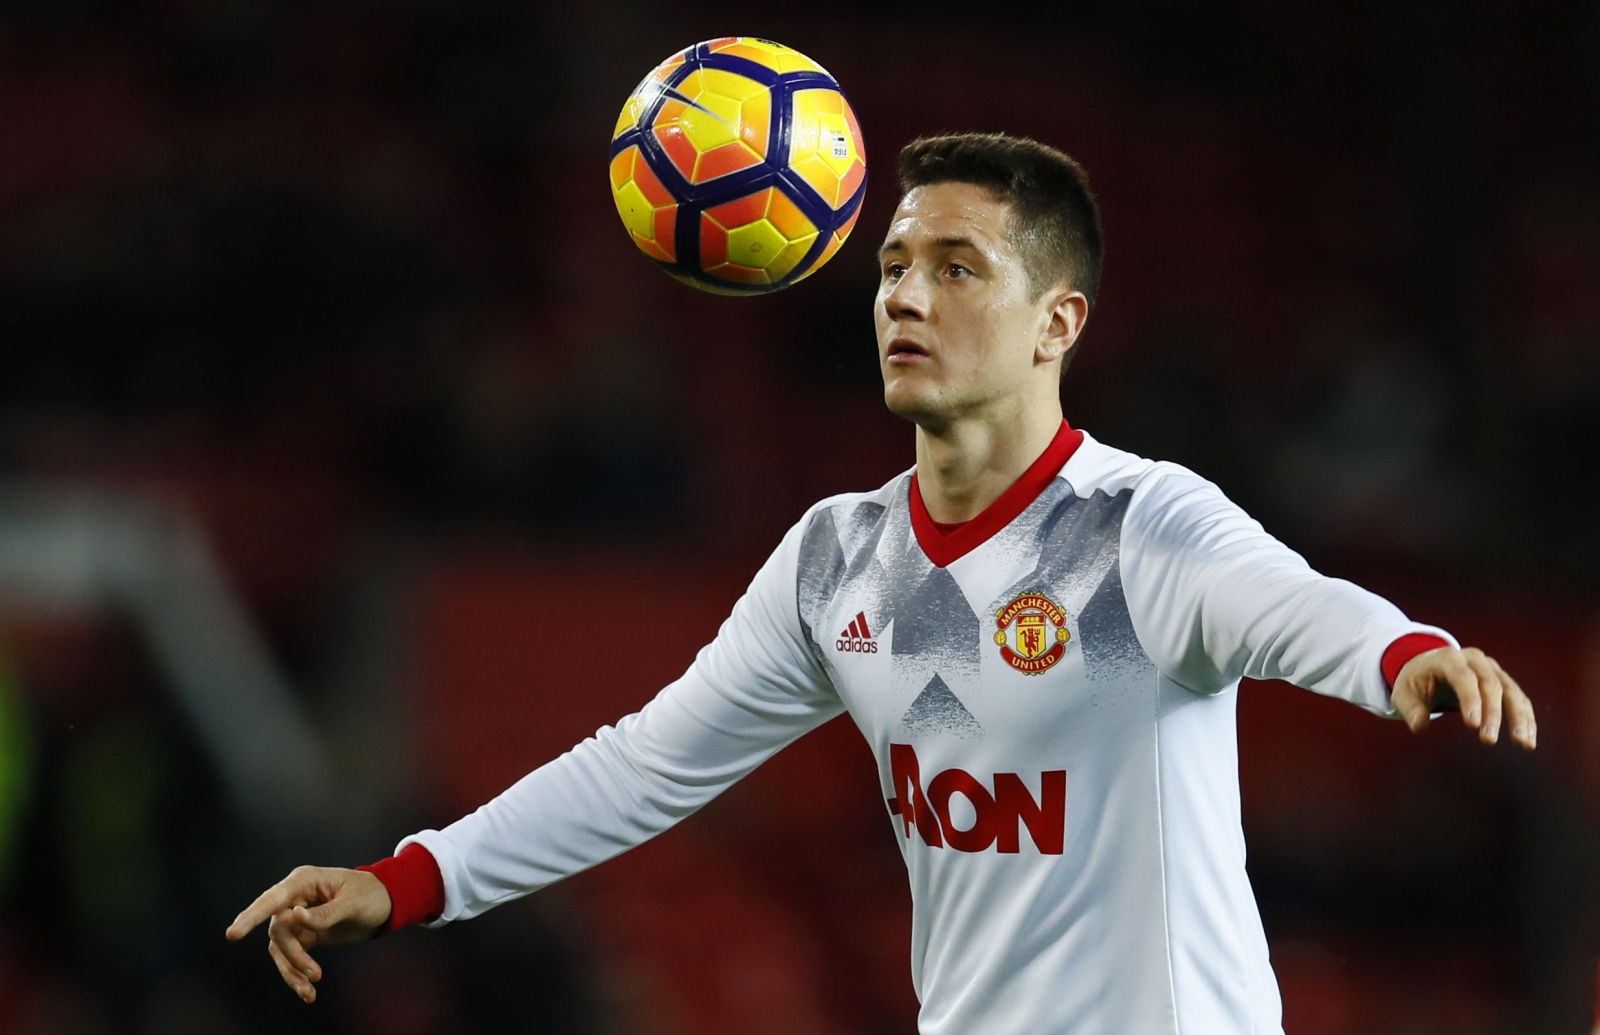 Manchester United laugh off reports linking Ander Herrera with Barcelona1600 x 1035